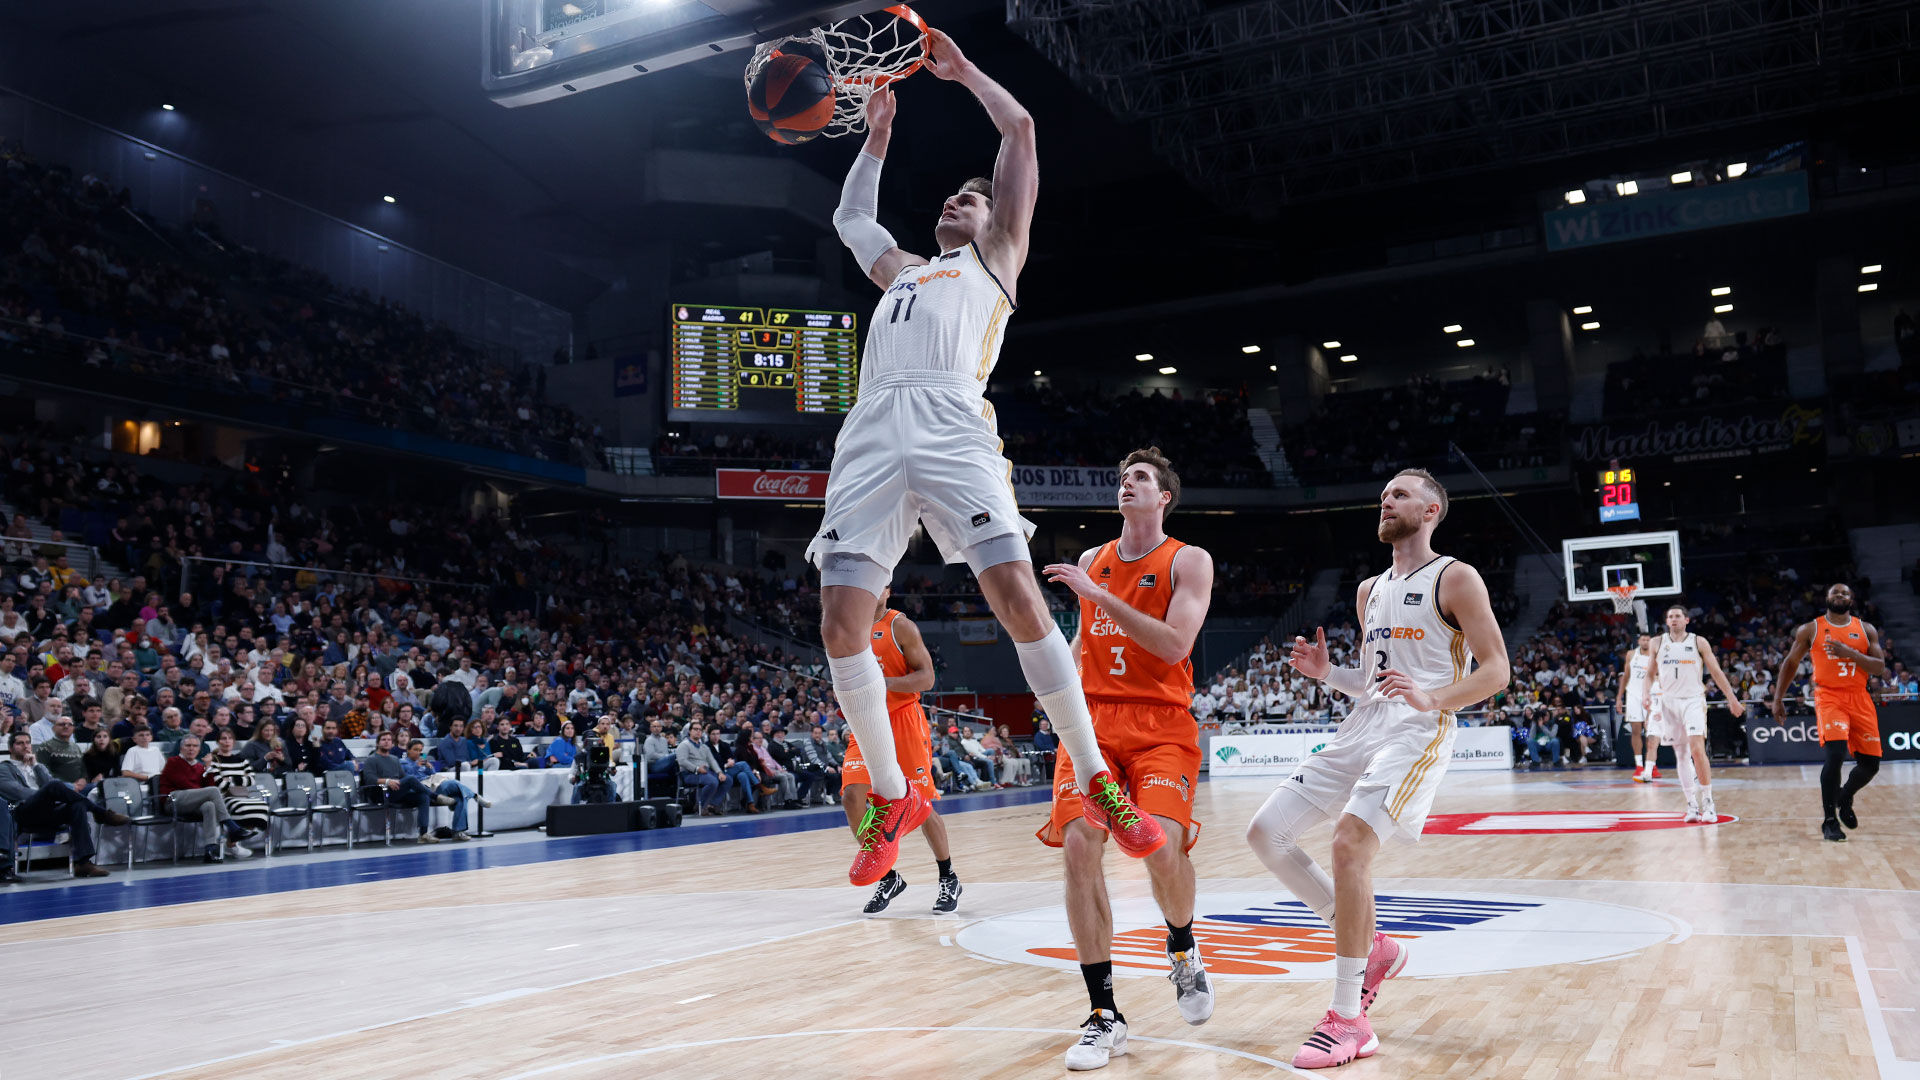 Real Madrid travels to face Valencia Basket this Friday